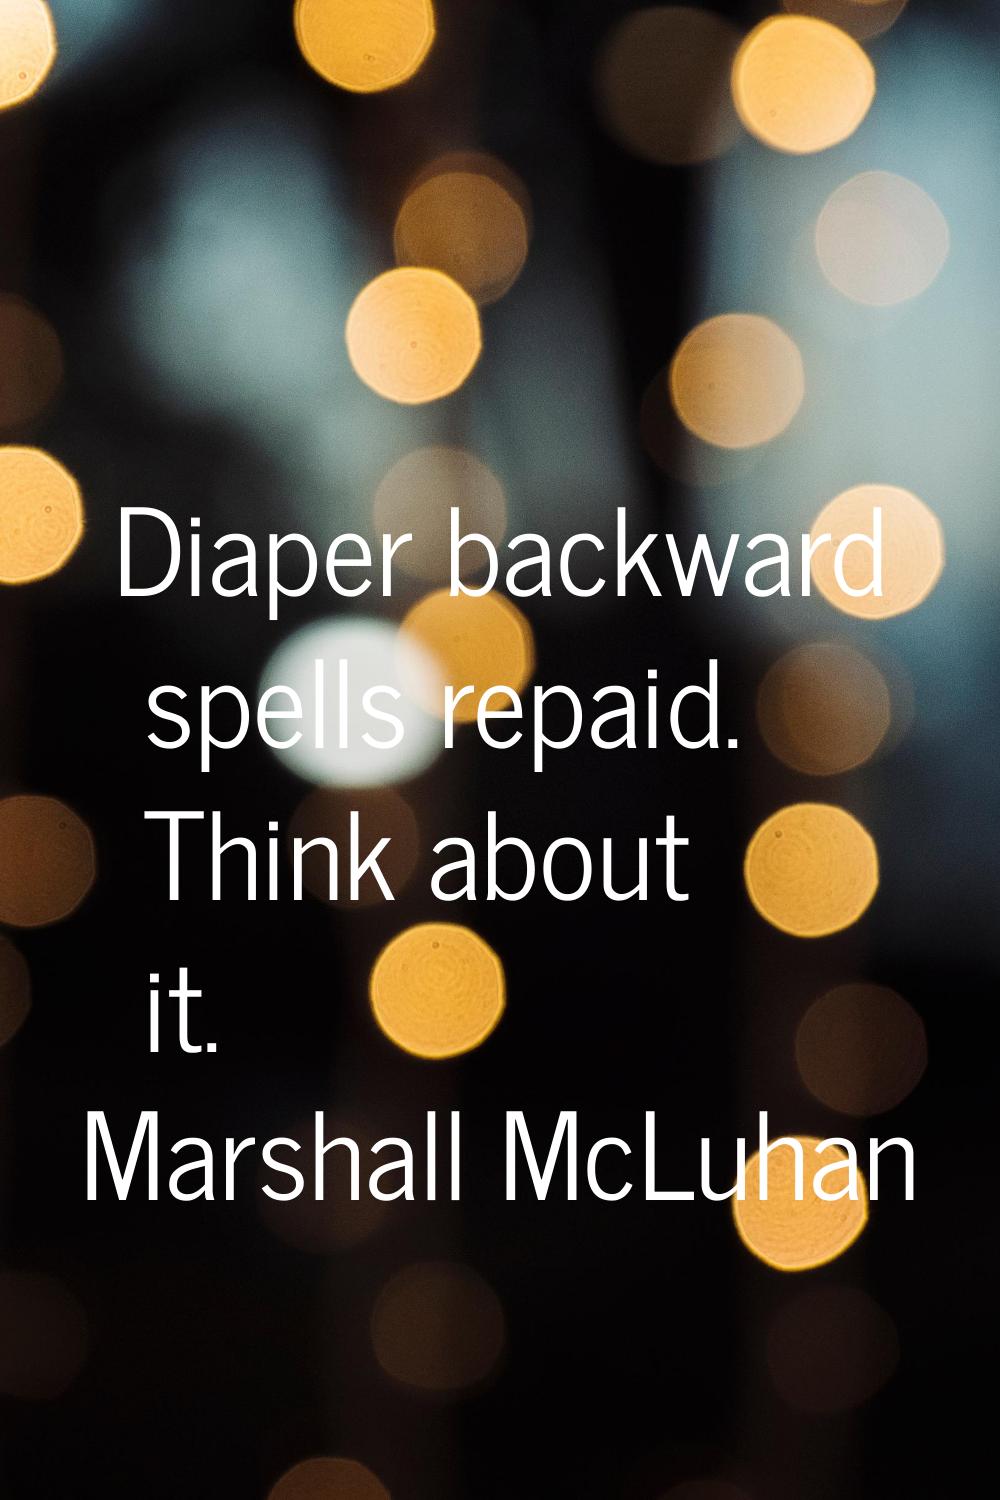 Diaper backward spells repaid. Think about it.